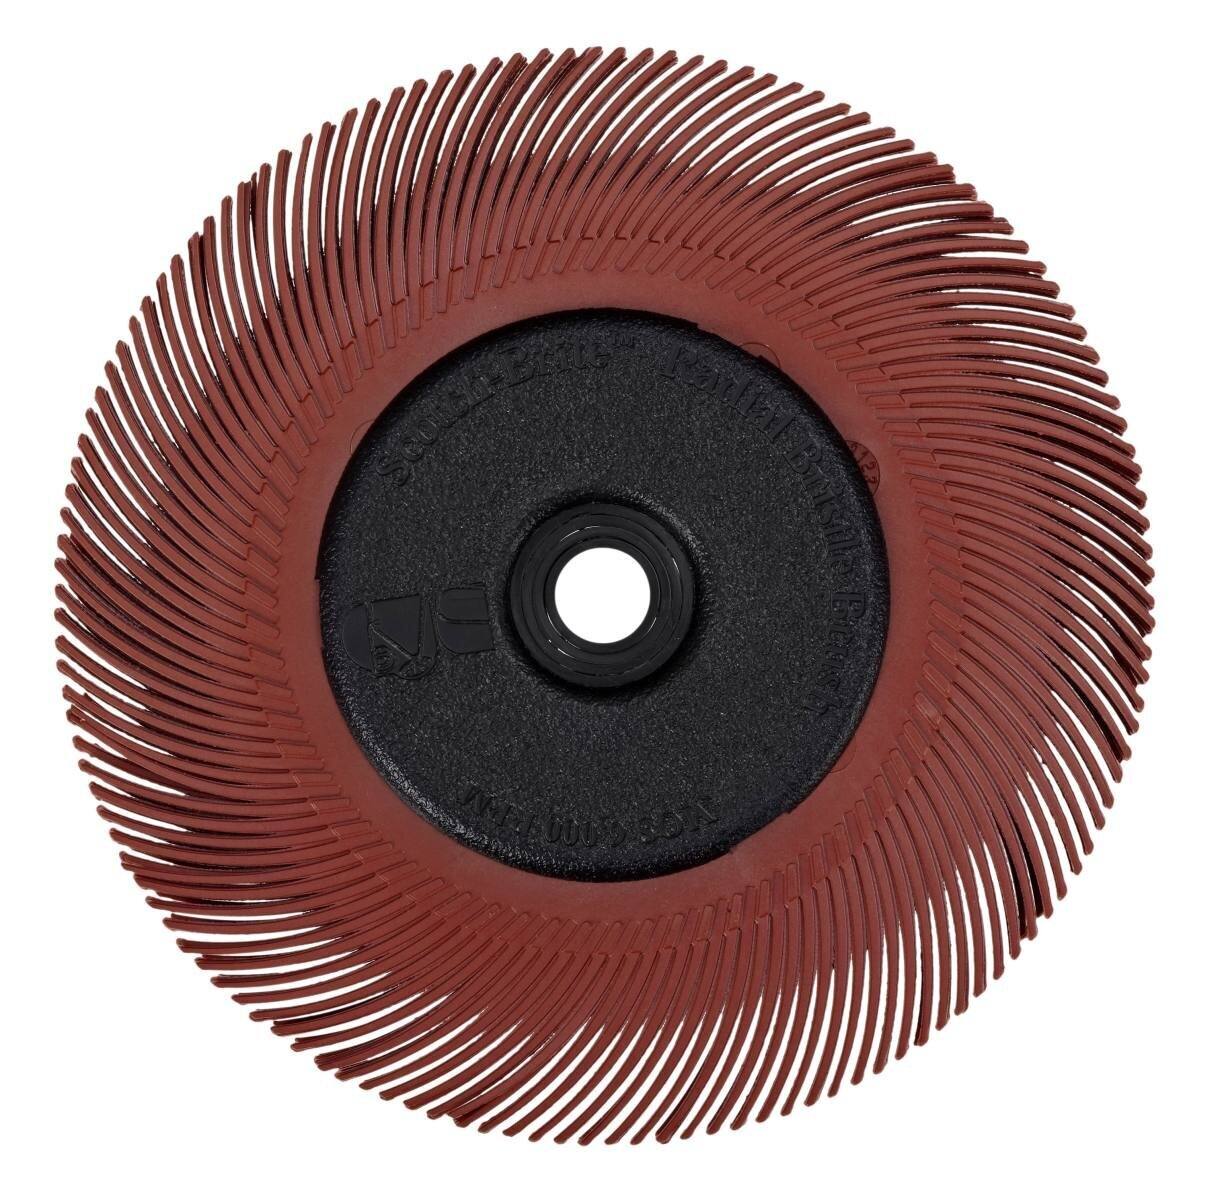 3M Scotch-Brite Radial Bristle Disc BB-ZB with flange, red, 193.5 mm, P220, type C #33084